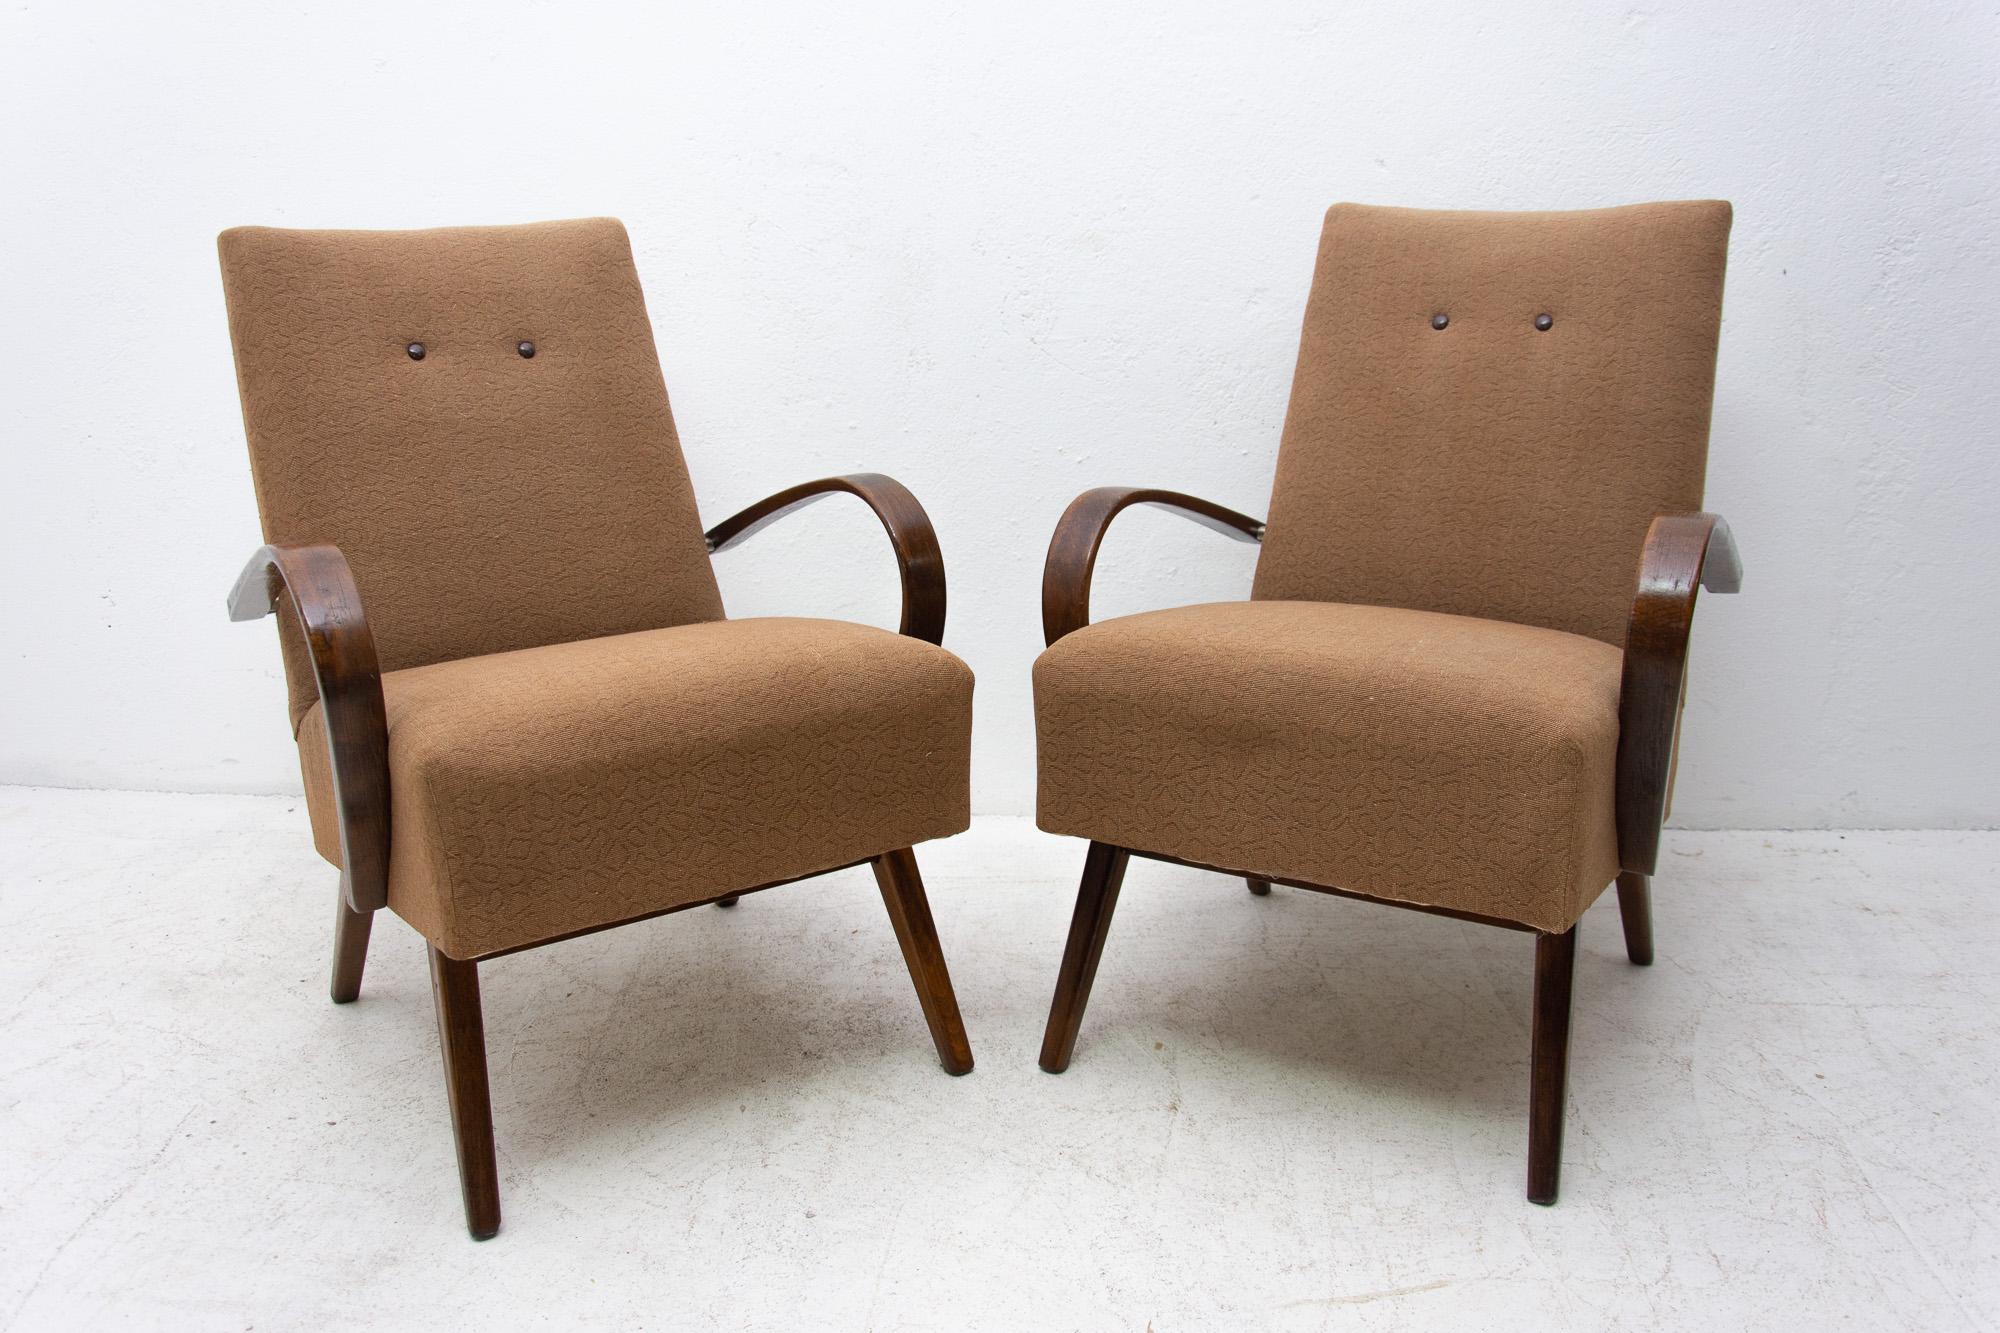 These bentwood armchairs were designed by Jaroslav Šmídek and made in the former Czechoslovakia in the 1960s.

The chairs are stable and comfortable. They are in good vintage condition, shows signs of age and using.

Price is for the pair.